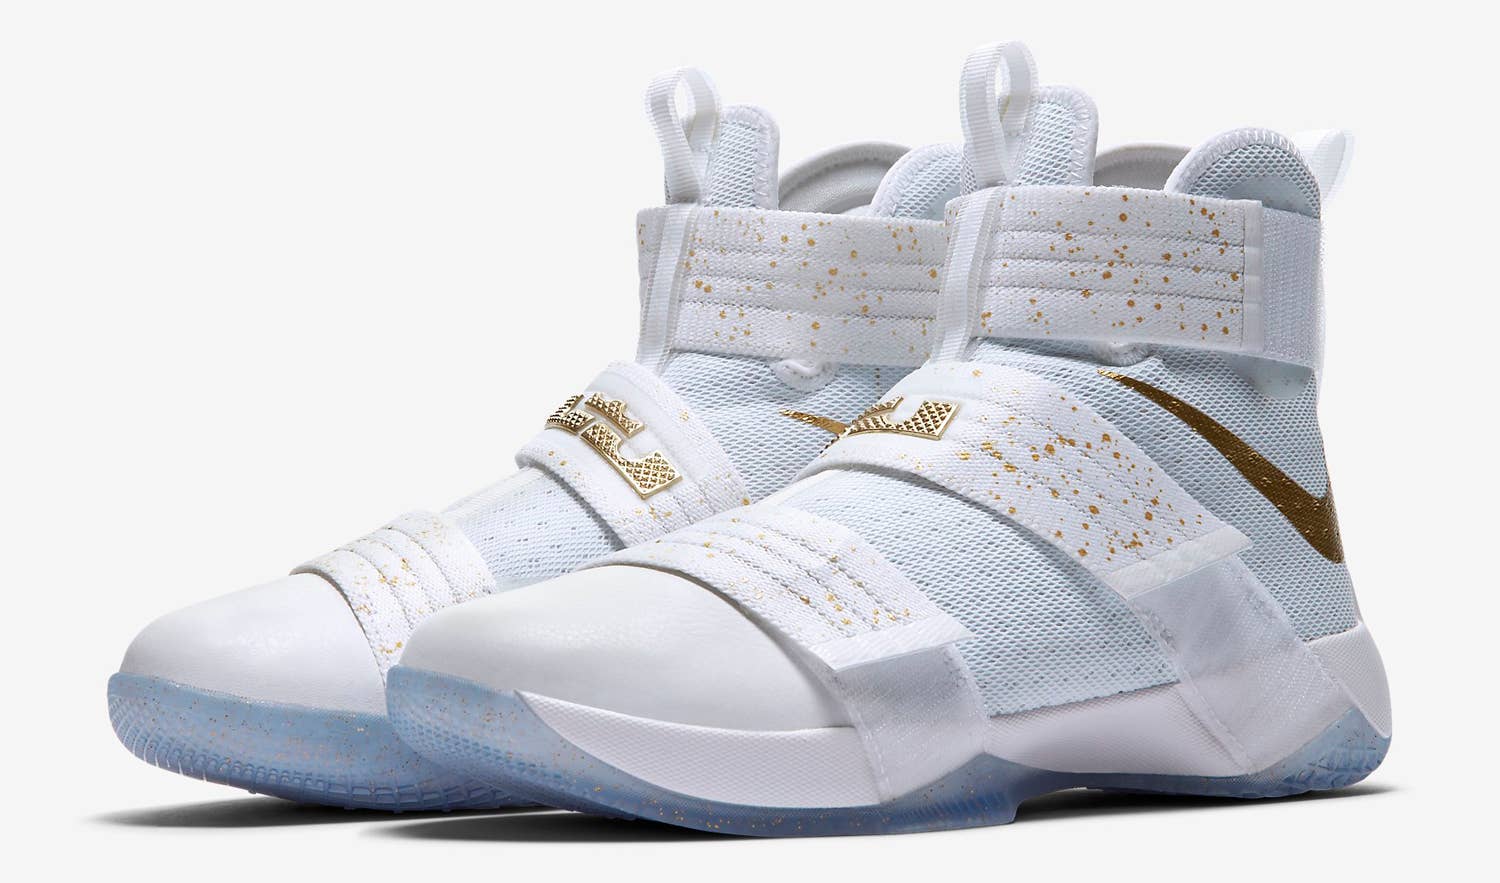 Lebron James' Gold Medal Nikes Release Next Week | Complex